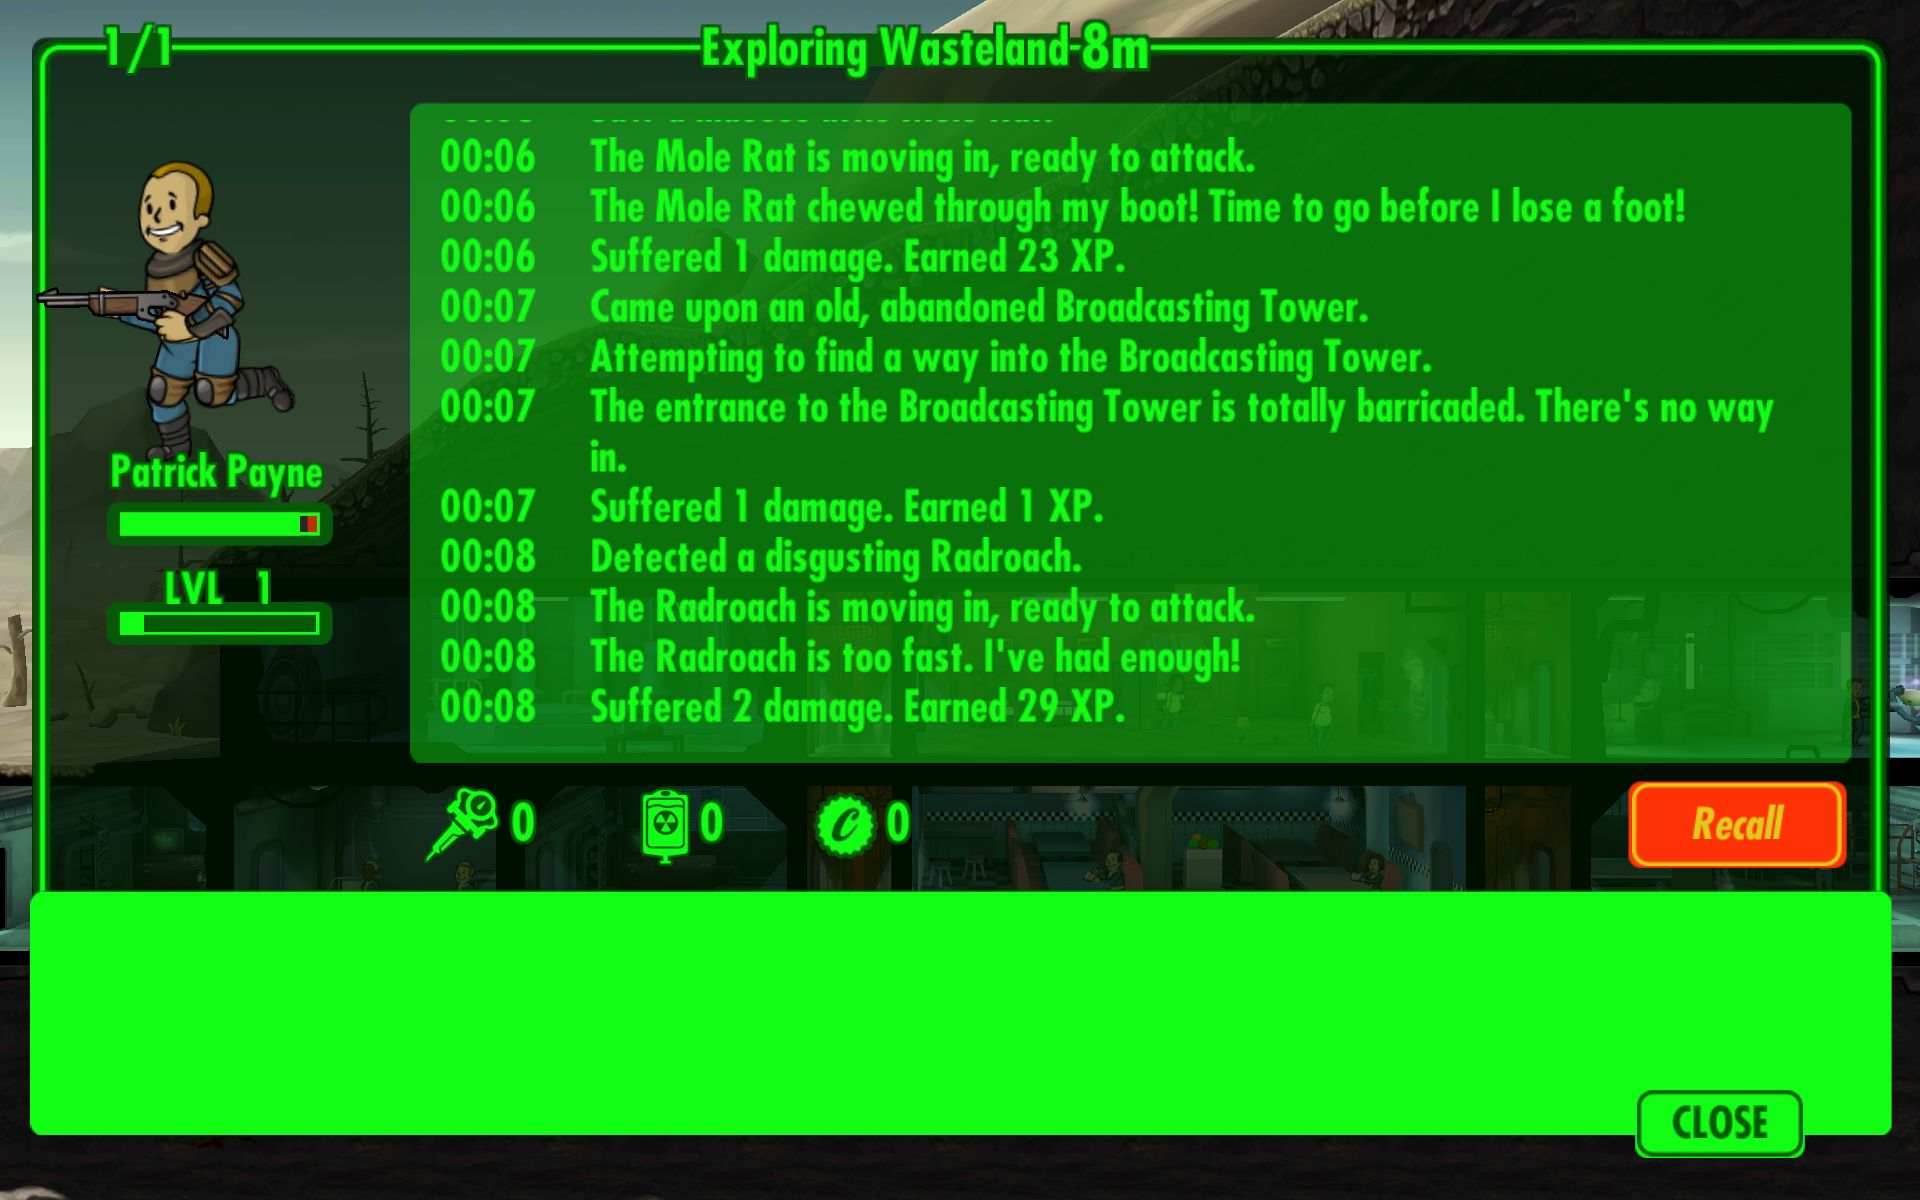 fallout shelter tips on naming swellers